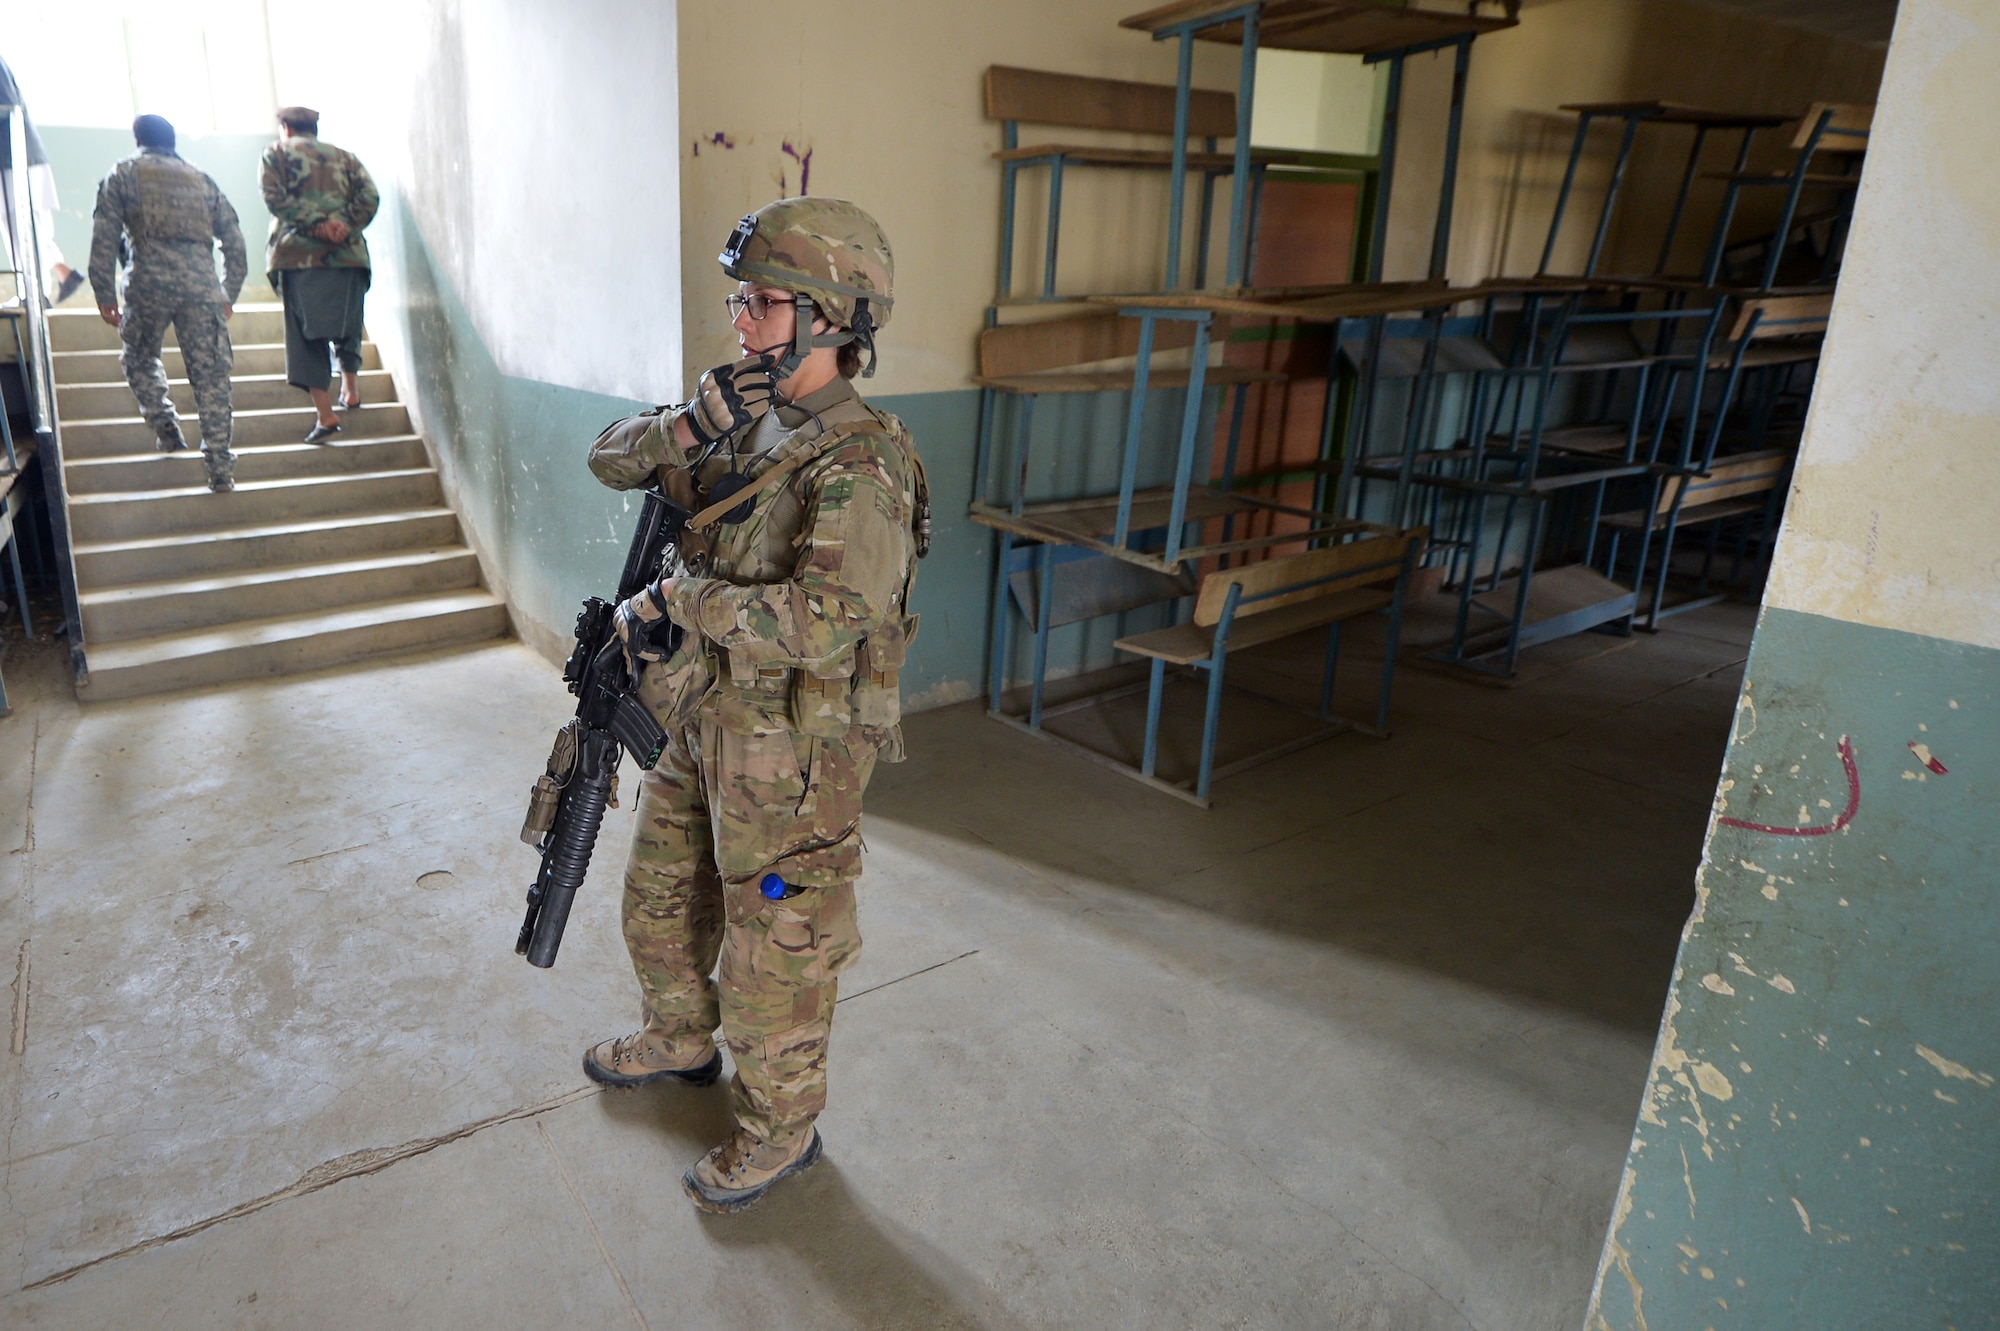 Staff Sgt. Elizabeth Rosato, 755th Expeditionary Security Forces Squadron Reaper Team 1 member, patrols a school near Bagram Airfield, Afghanistan, March 11, 2013.  These groups of security forces members operate missions “outside the wire” providing security during key leader engagements and meetings with the local community. (U.S. Air Force photo/Senior Airman Chris Willis)